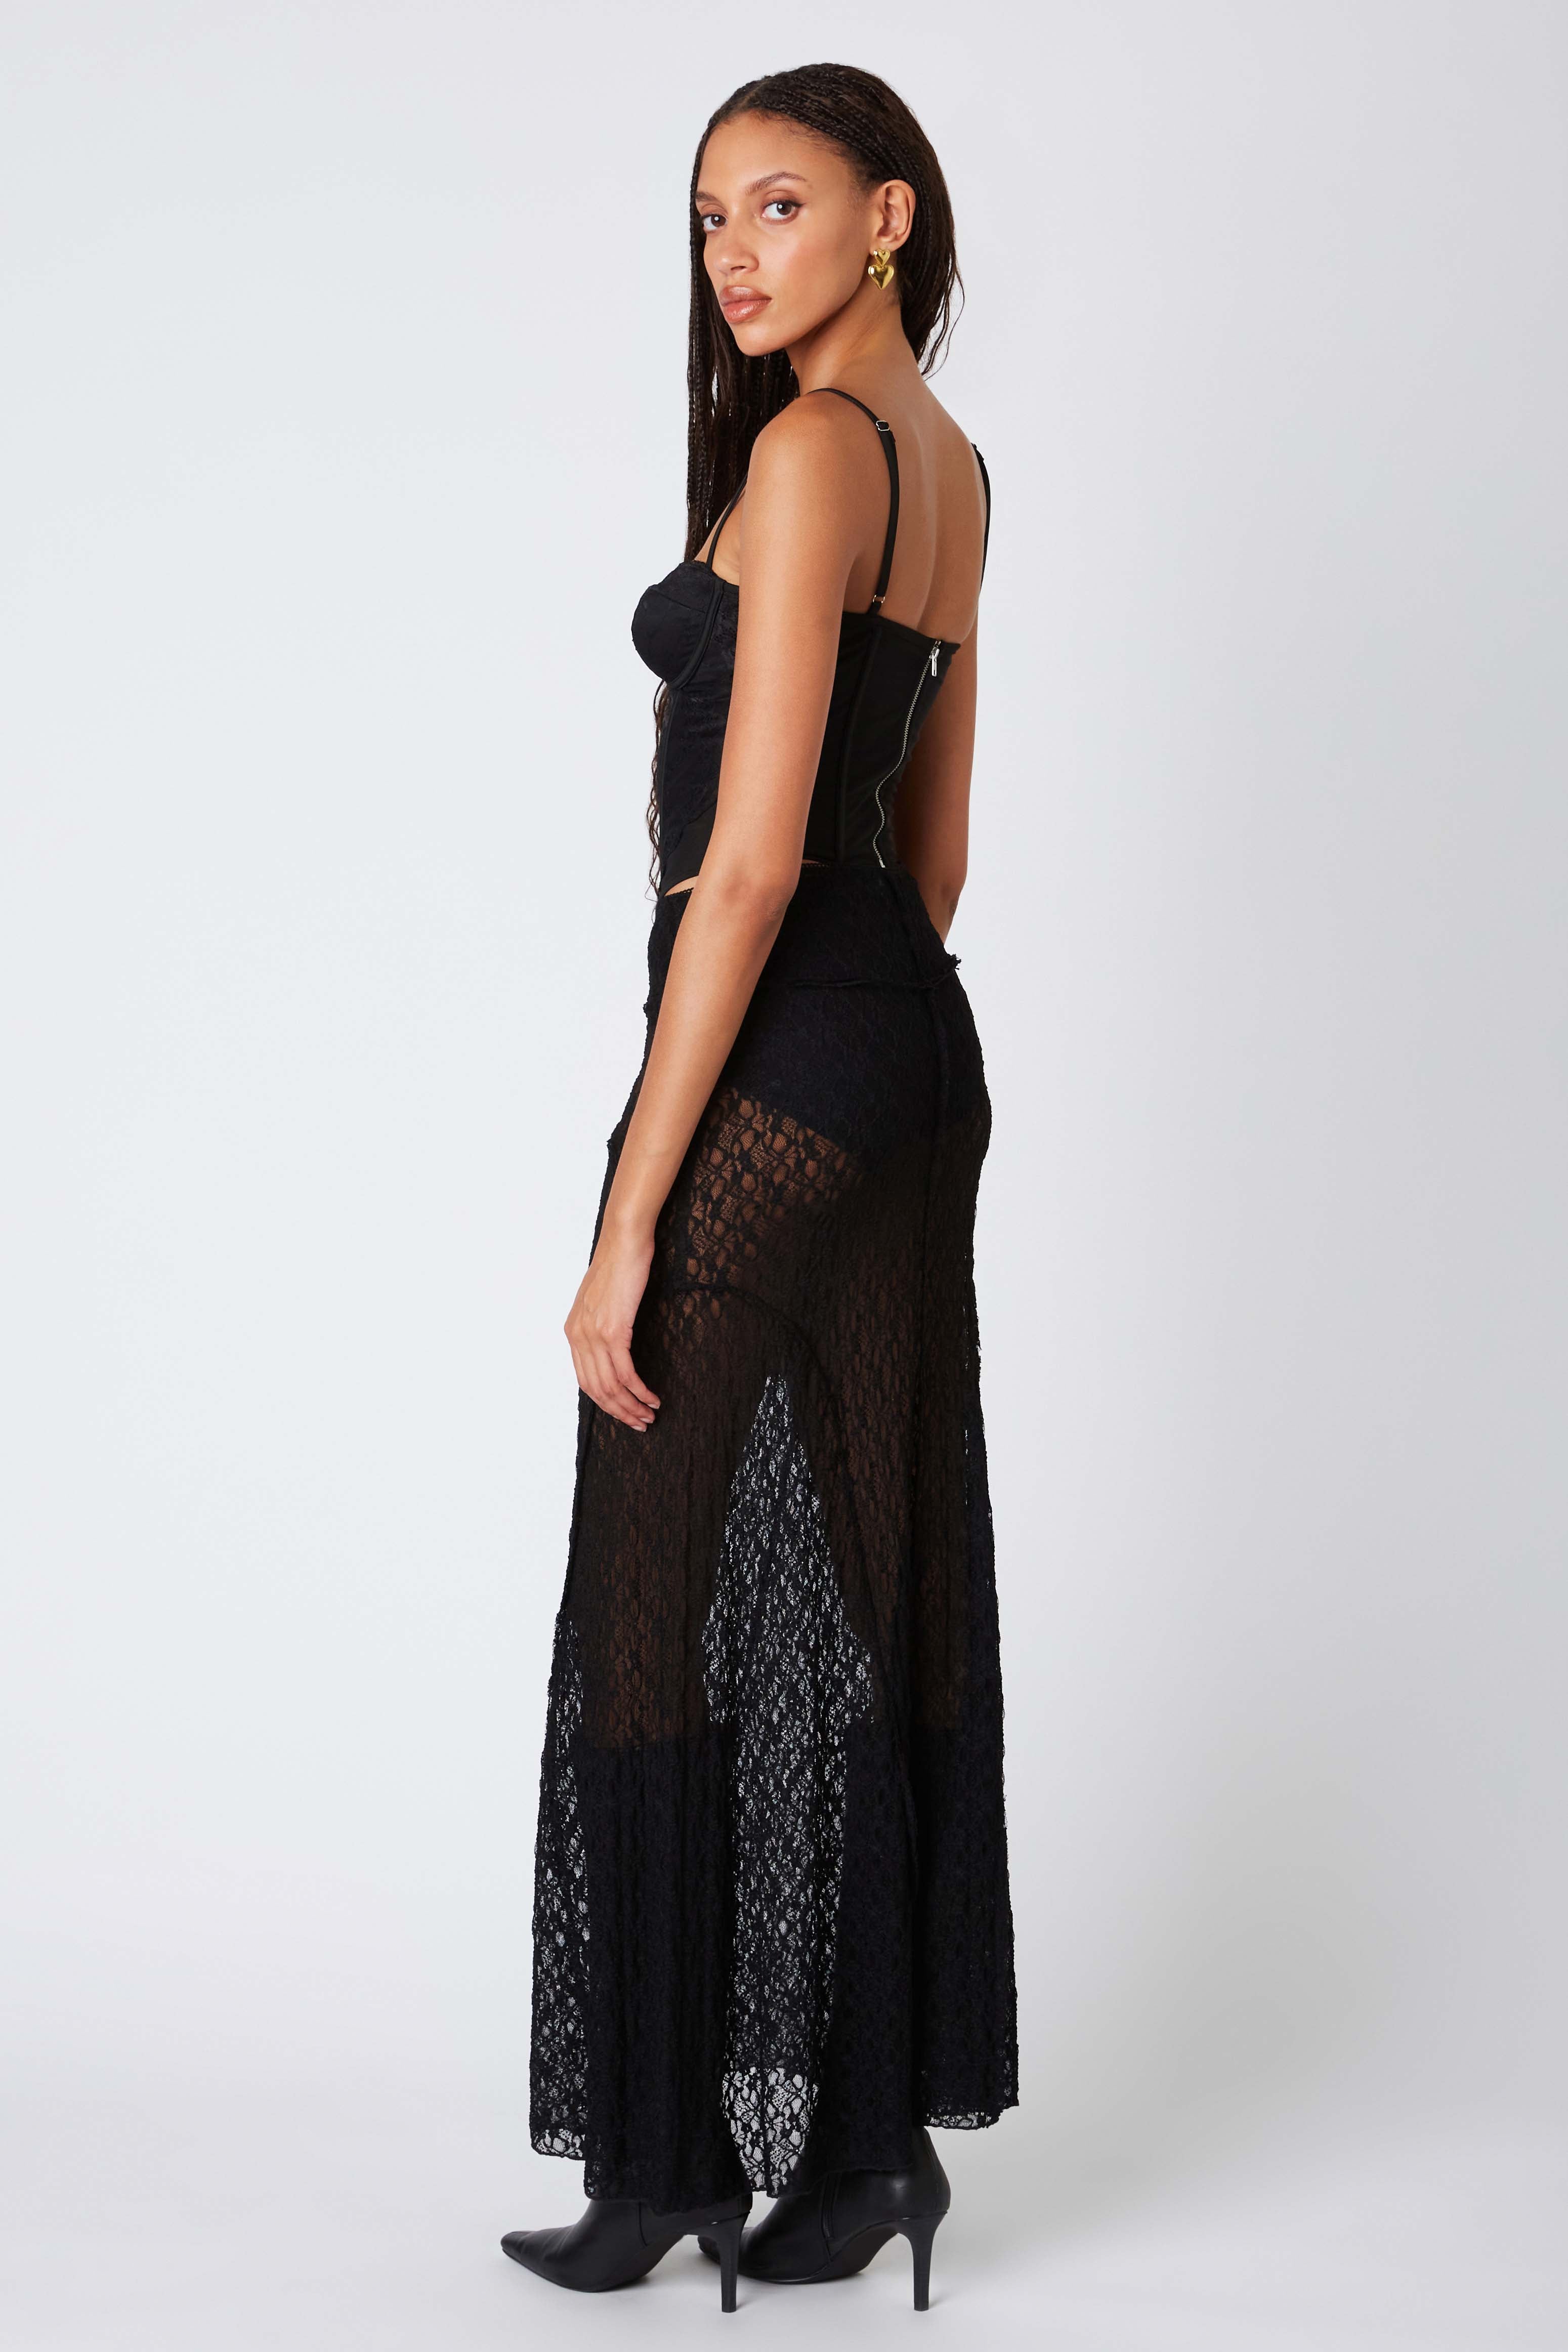 Sheer Lace Maxi Skirt in Black Back View